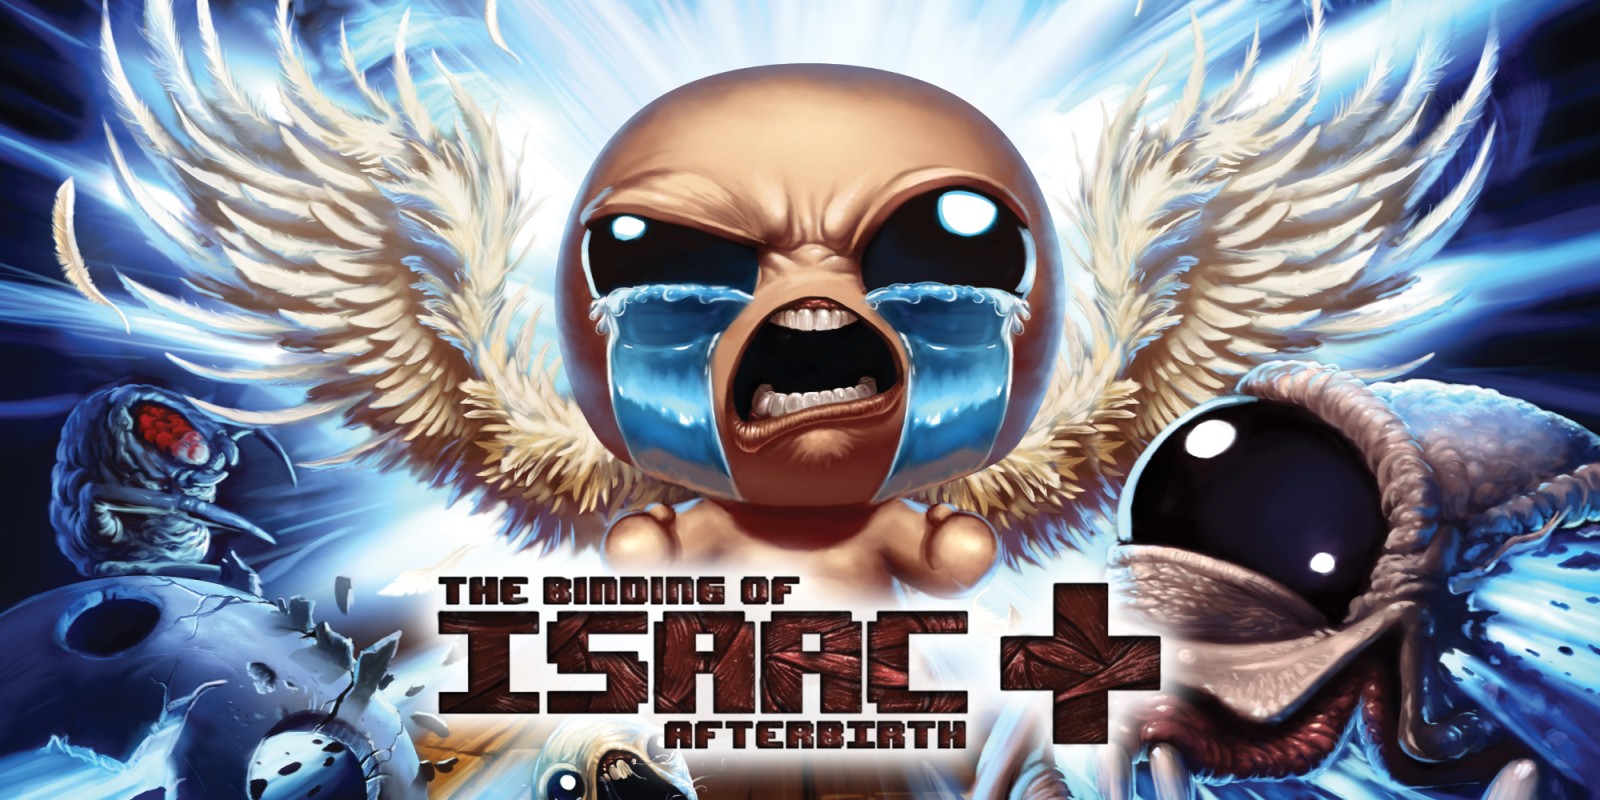 the binding of isaac download free